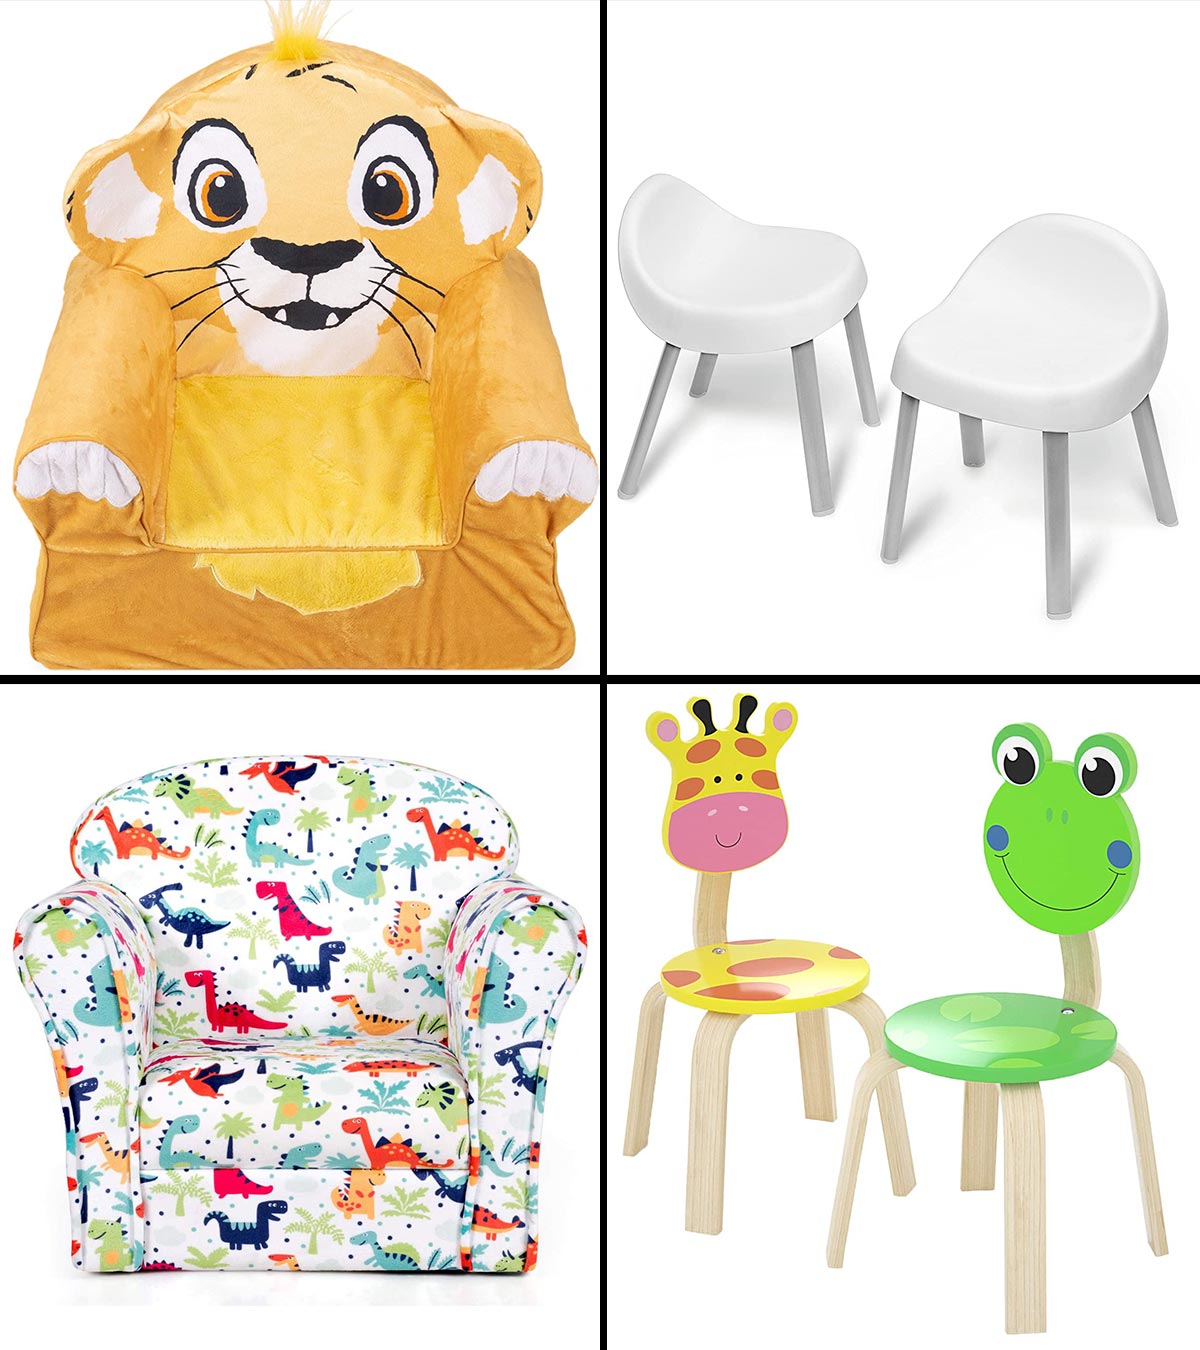 15 Best Toddler Chairs To Buy In 2021